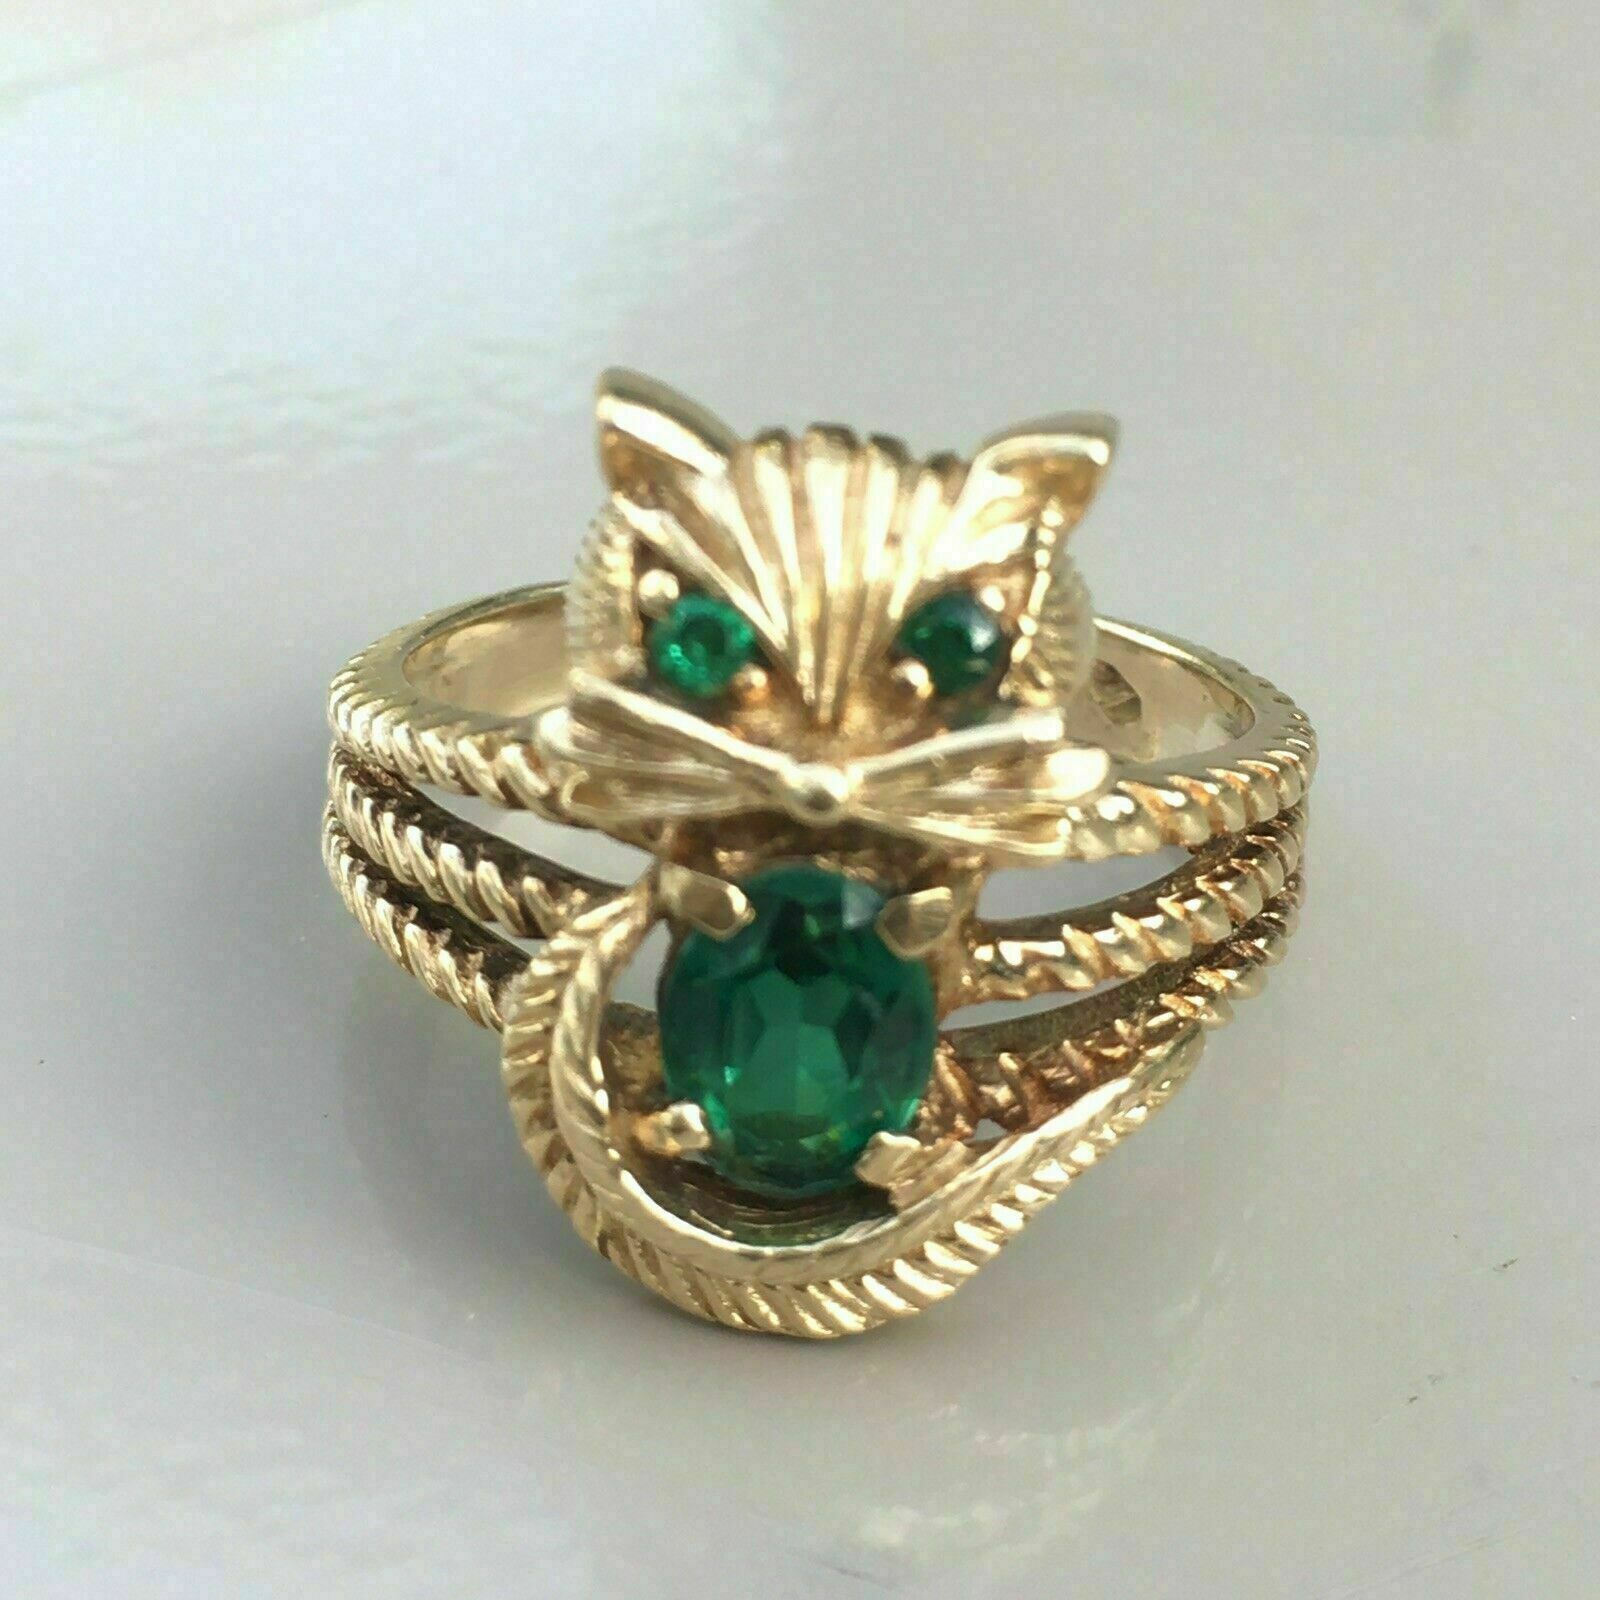 LOVELY 3Ct Simulated Emerald Antique Engagement Cat Ring925 Silver Gold Plated